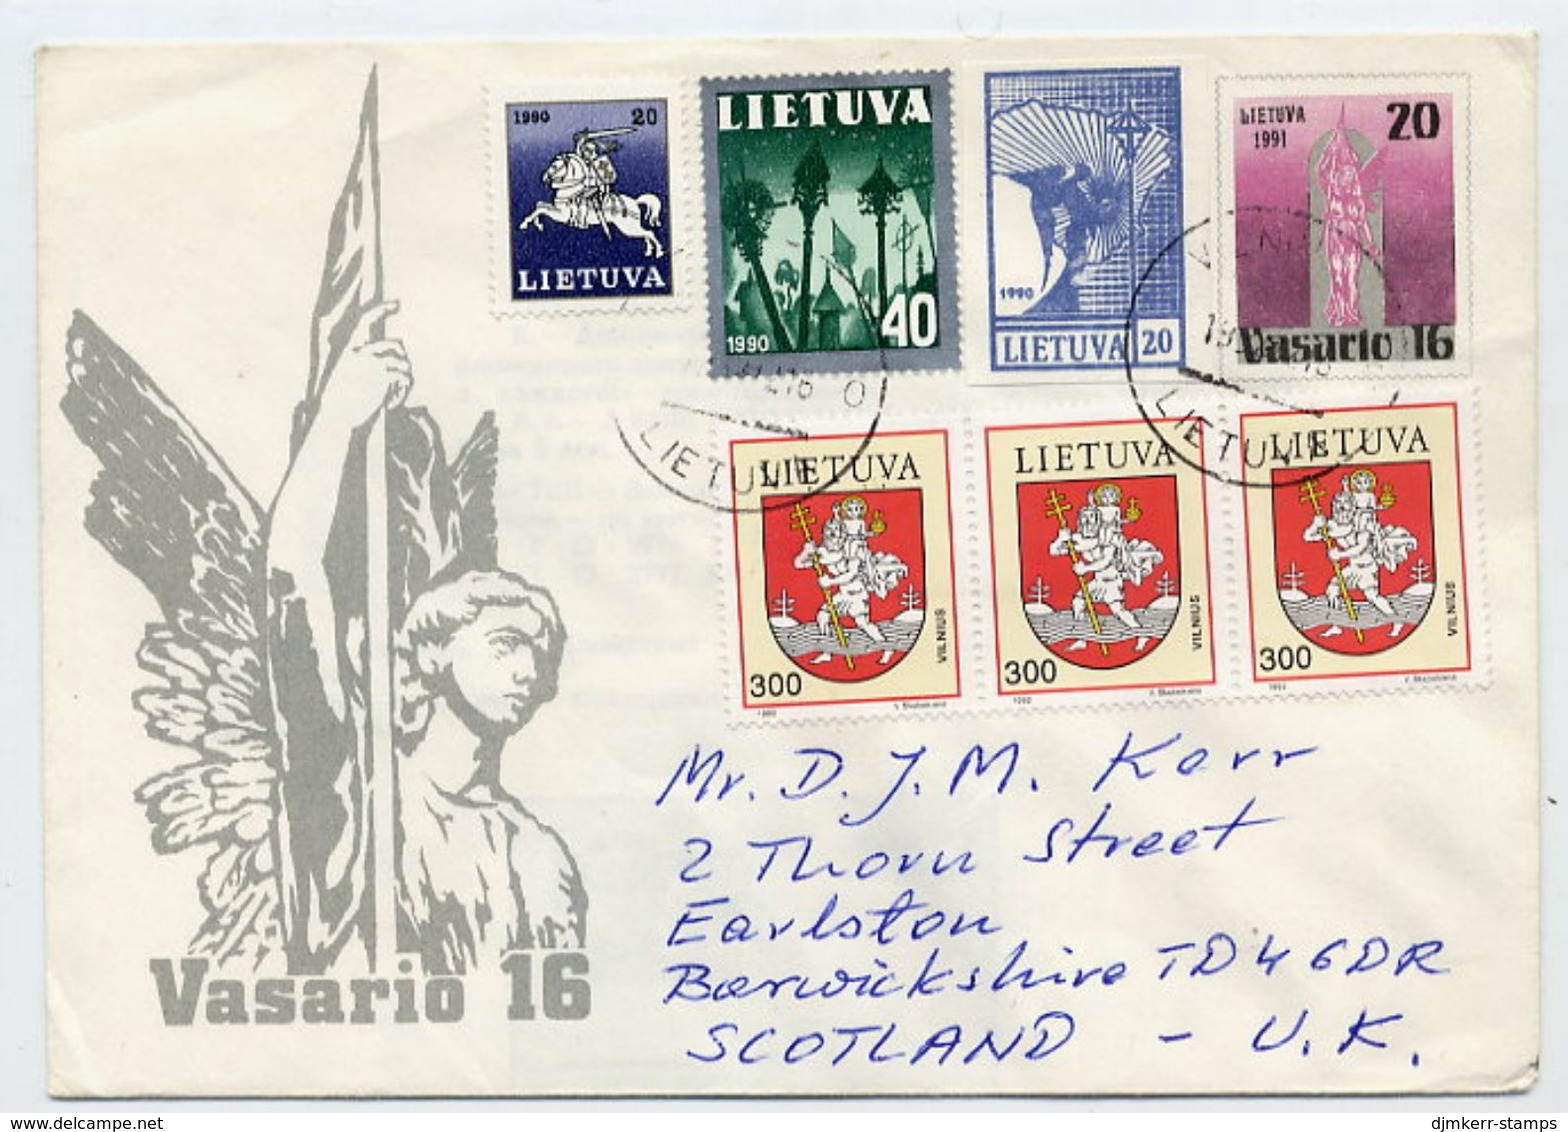 LITHUANIA 1991 Independence Anniversary Stationery Envelope, Used To UK.  Michel U12 - Lituania